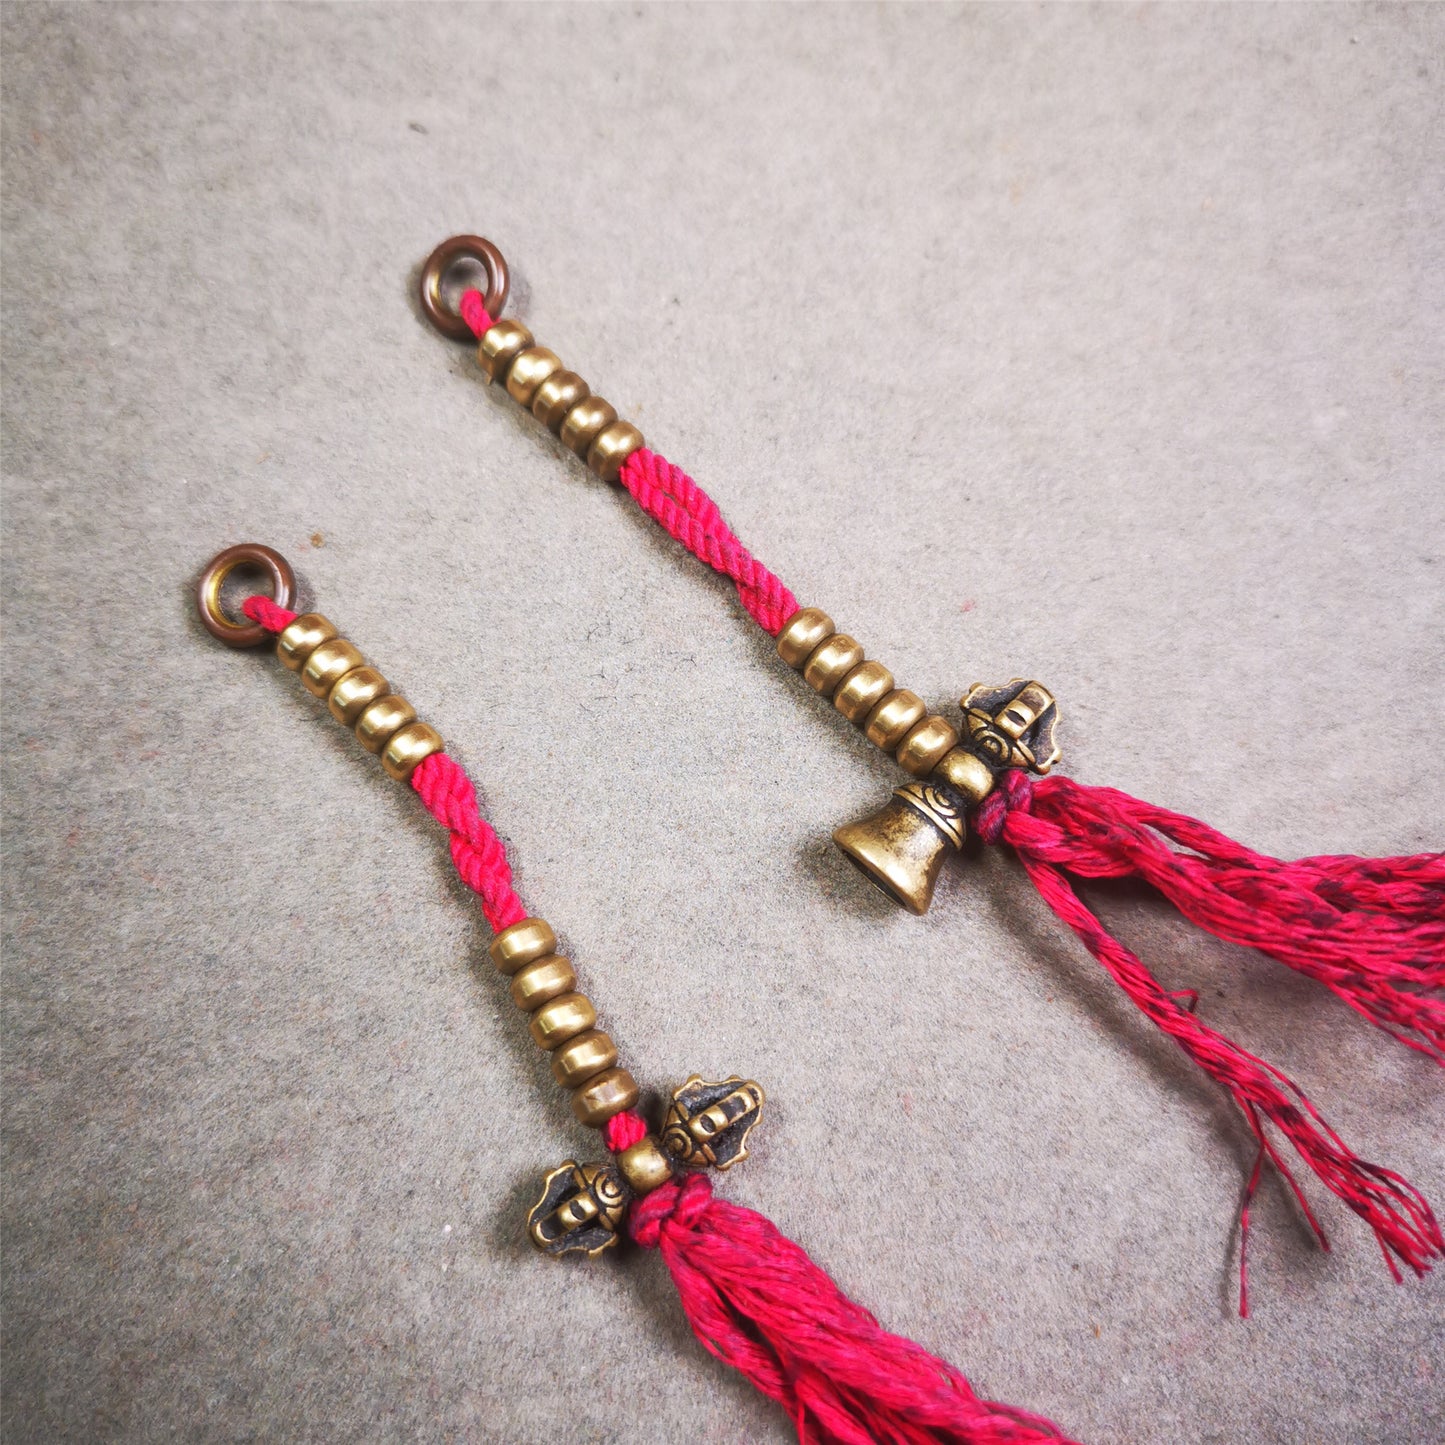 5mm Brass Prayer Bead Counters with Vajra and Bell Pendant